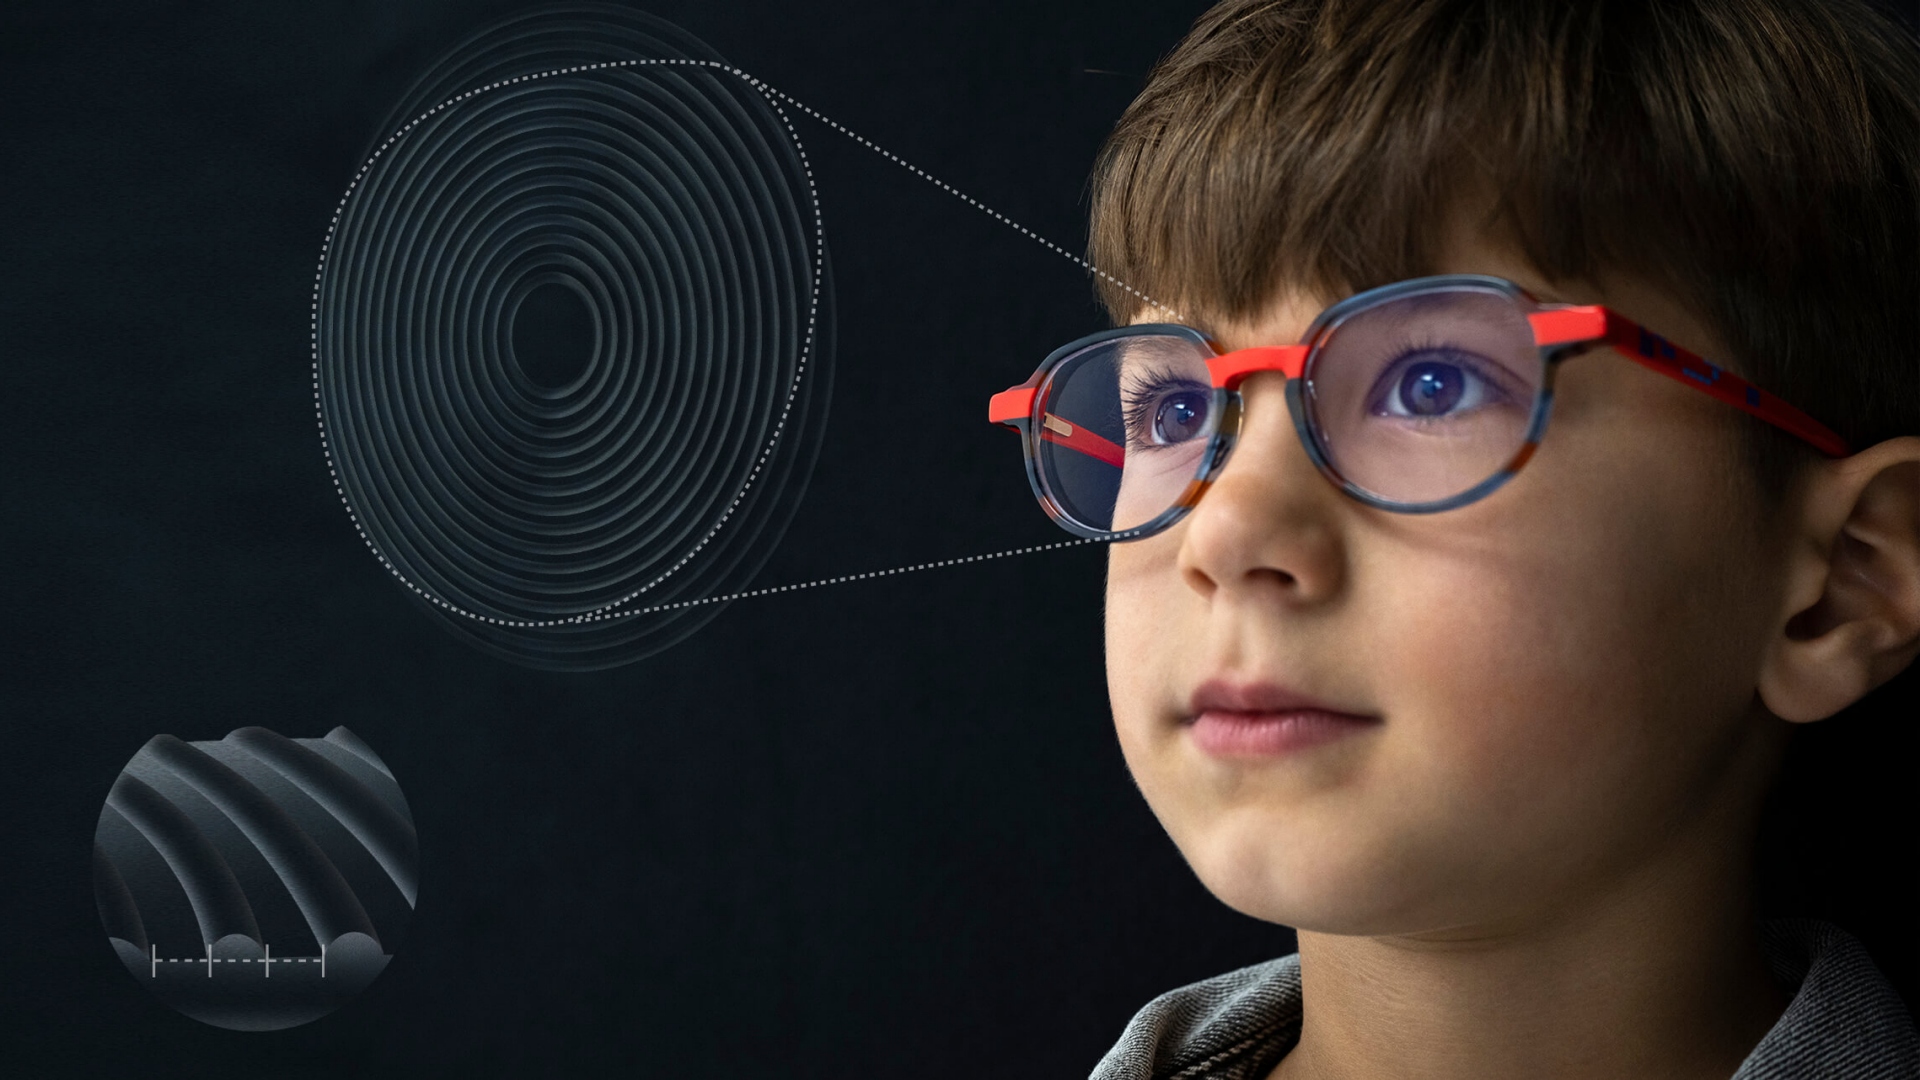 A close-up illustration of the ZEISS MyoCare lens design for myopia management in children.